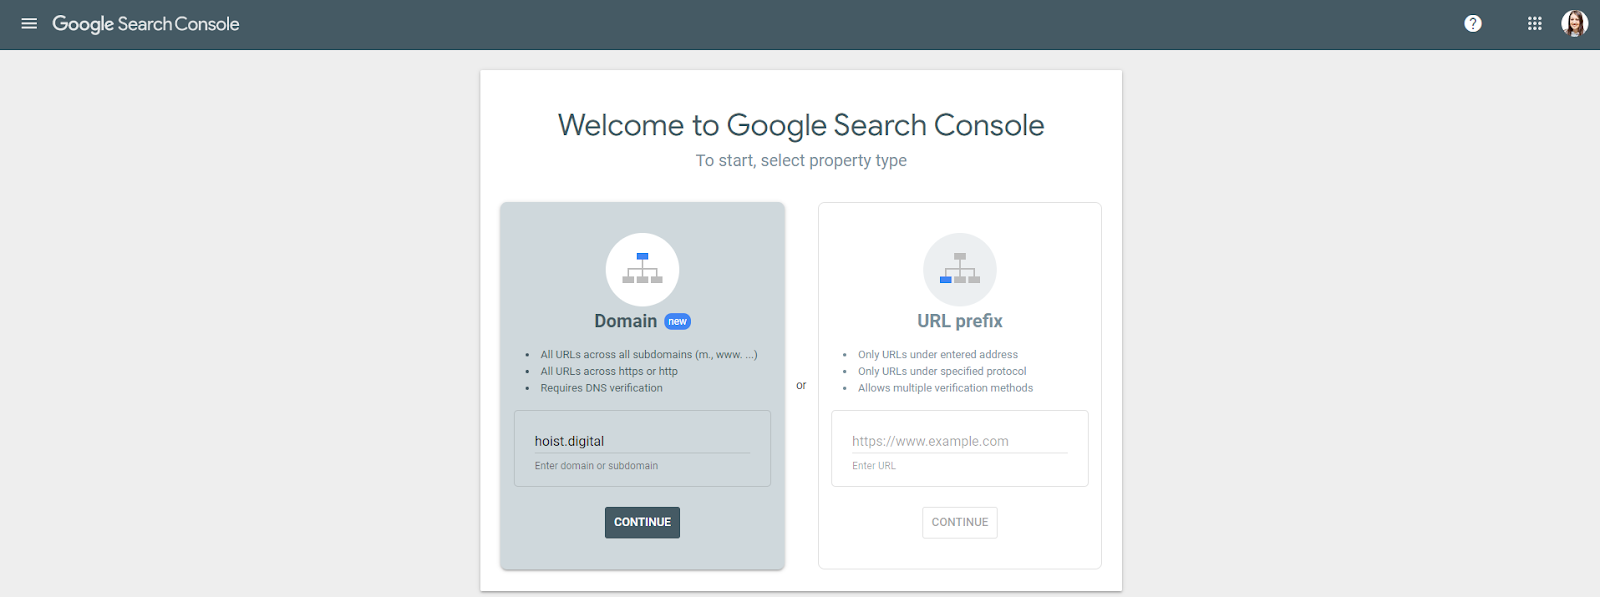 Google Search Console homepage for adding a website to request indexing